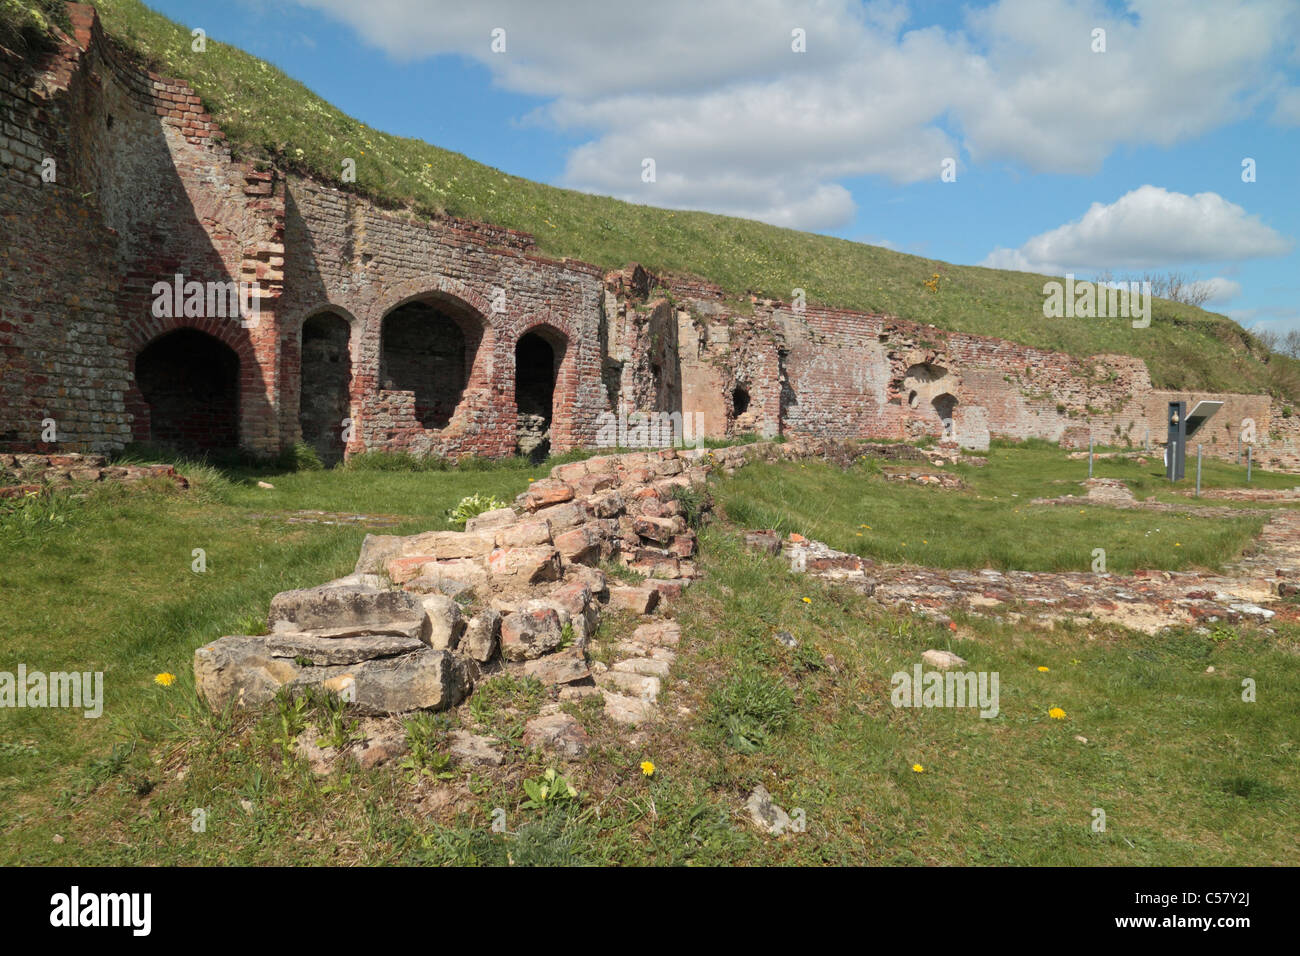 The remains of the kitchen area beside the site of the Great Hall in Basing House, Old Basing, Hampshire, UK. Stock Photo